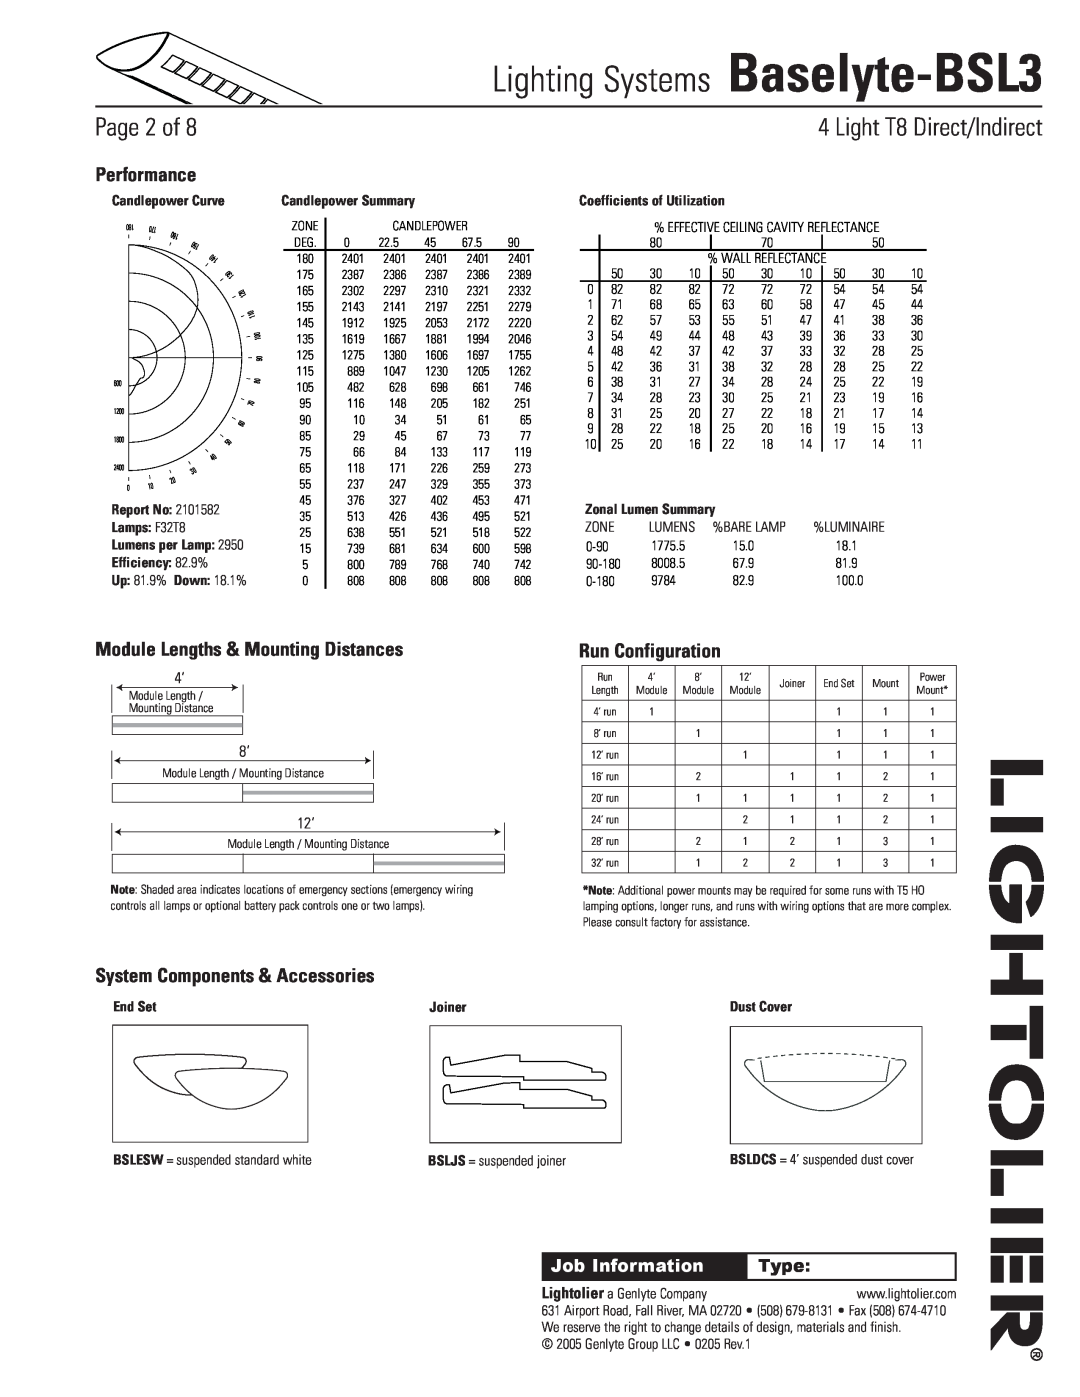 Lightolier Lighting Systems Baselyte-BSL3, Page of, Performance, Module Lengths & Mounting Distances, Run Configuration 